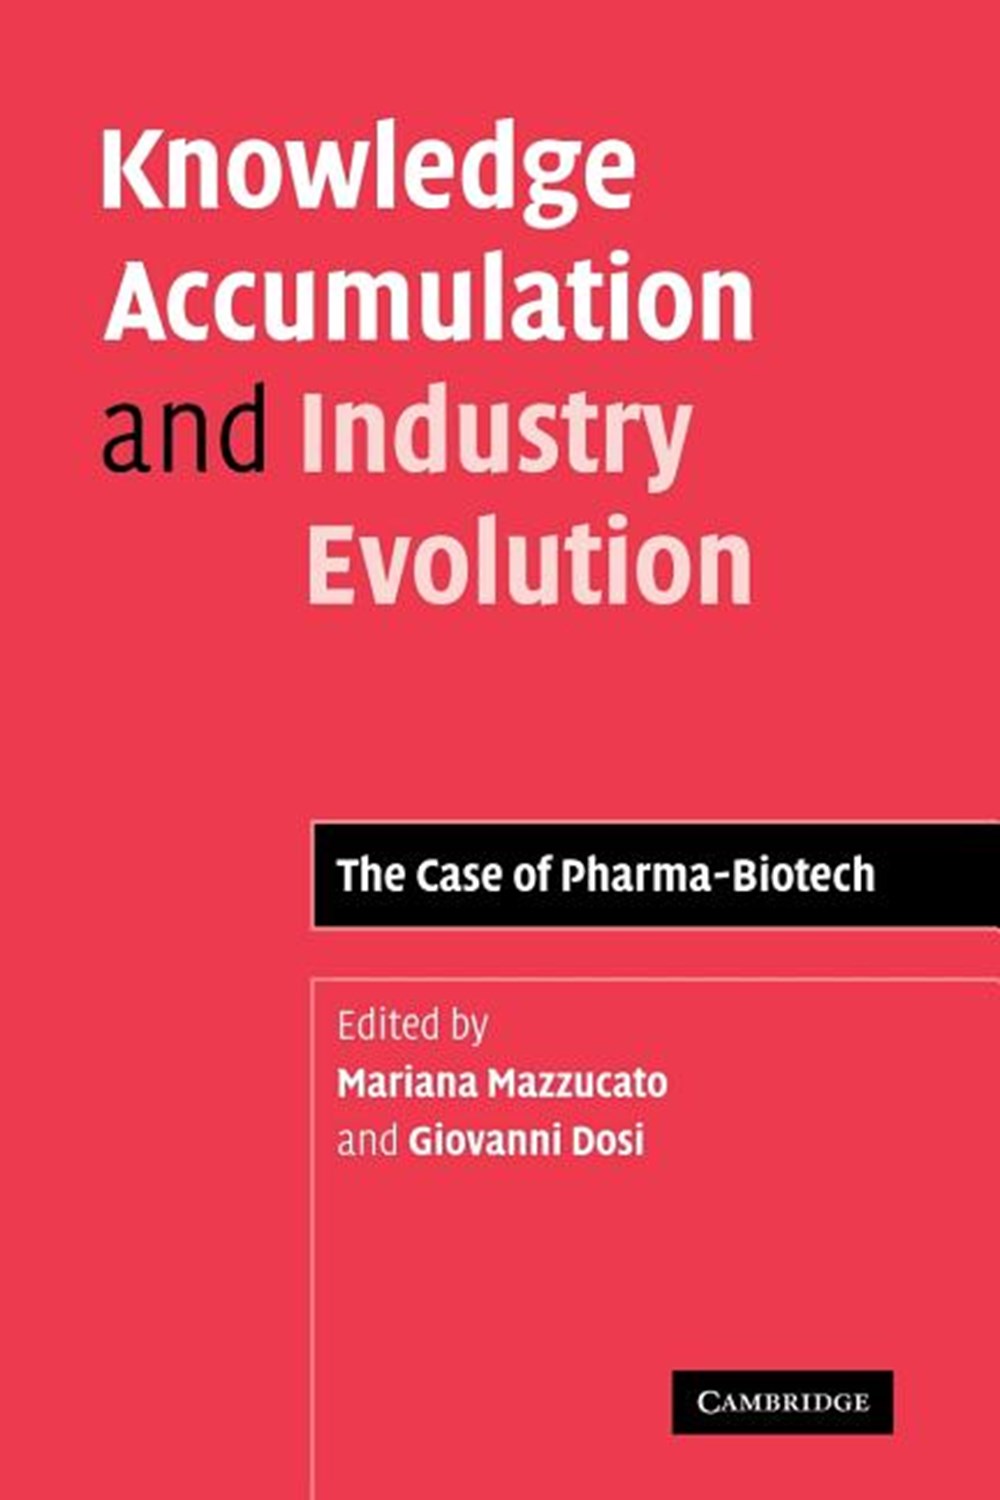 Knowledge Accumulation and Industry Evolution The Case of Pharma-Biotech